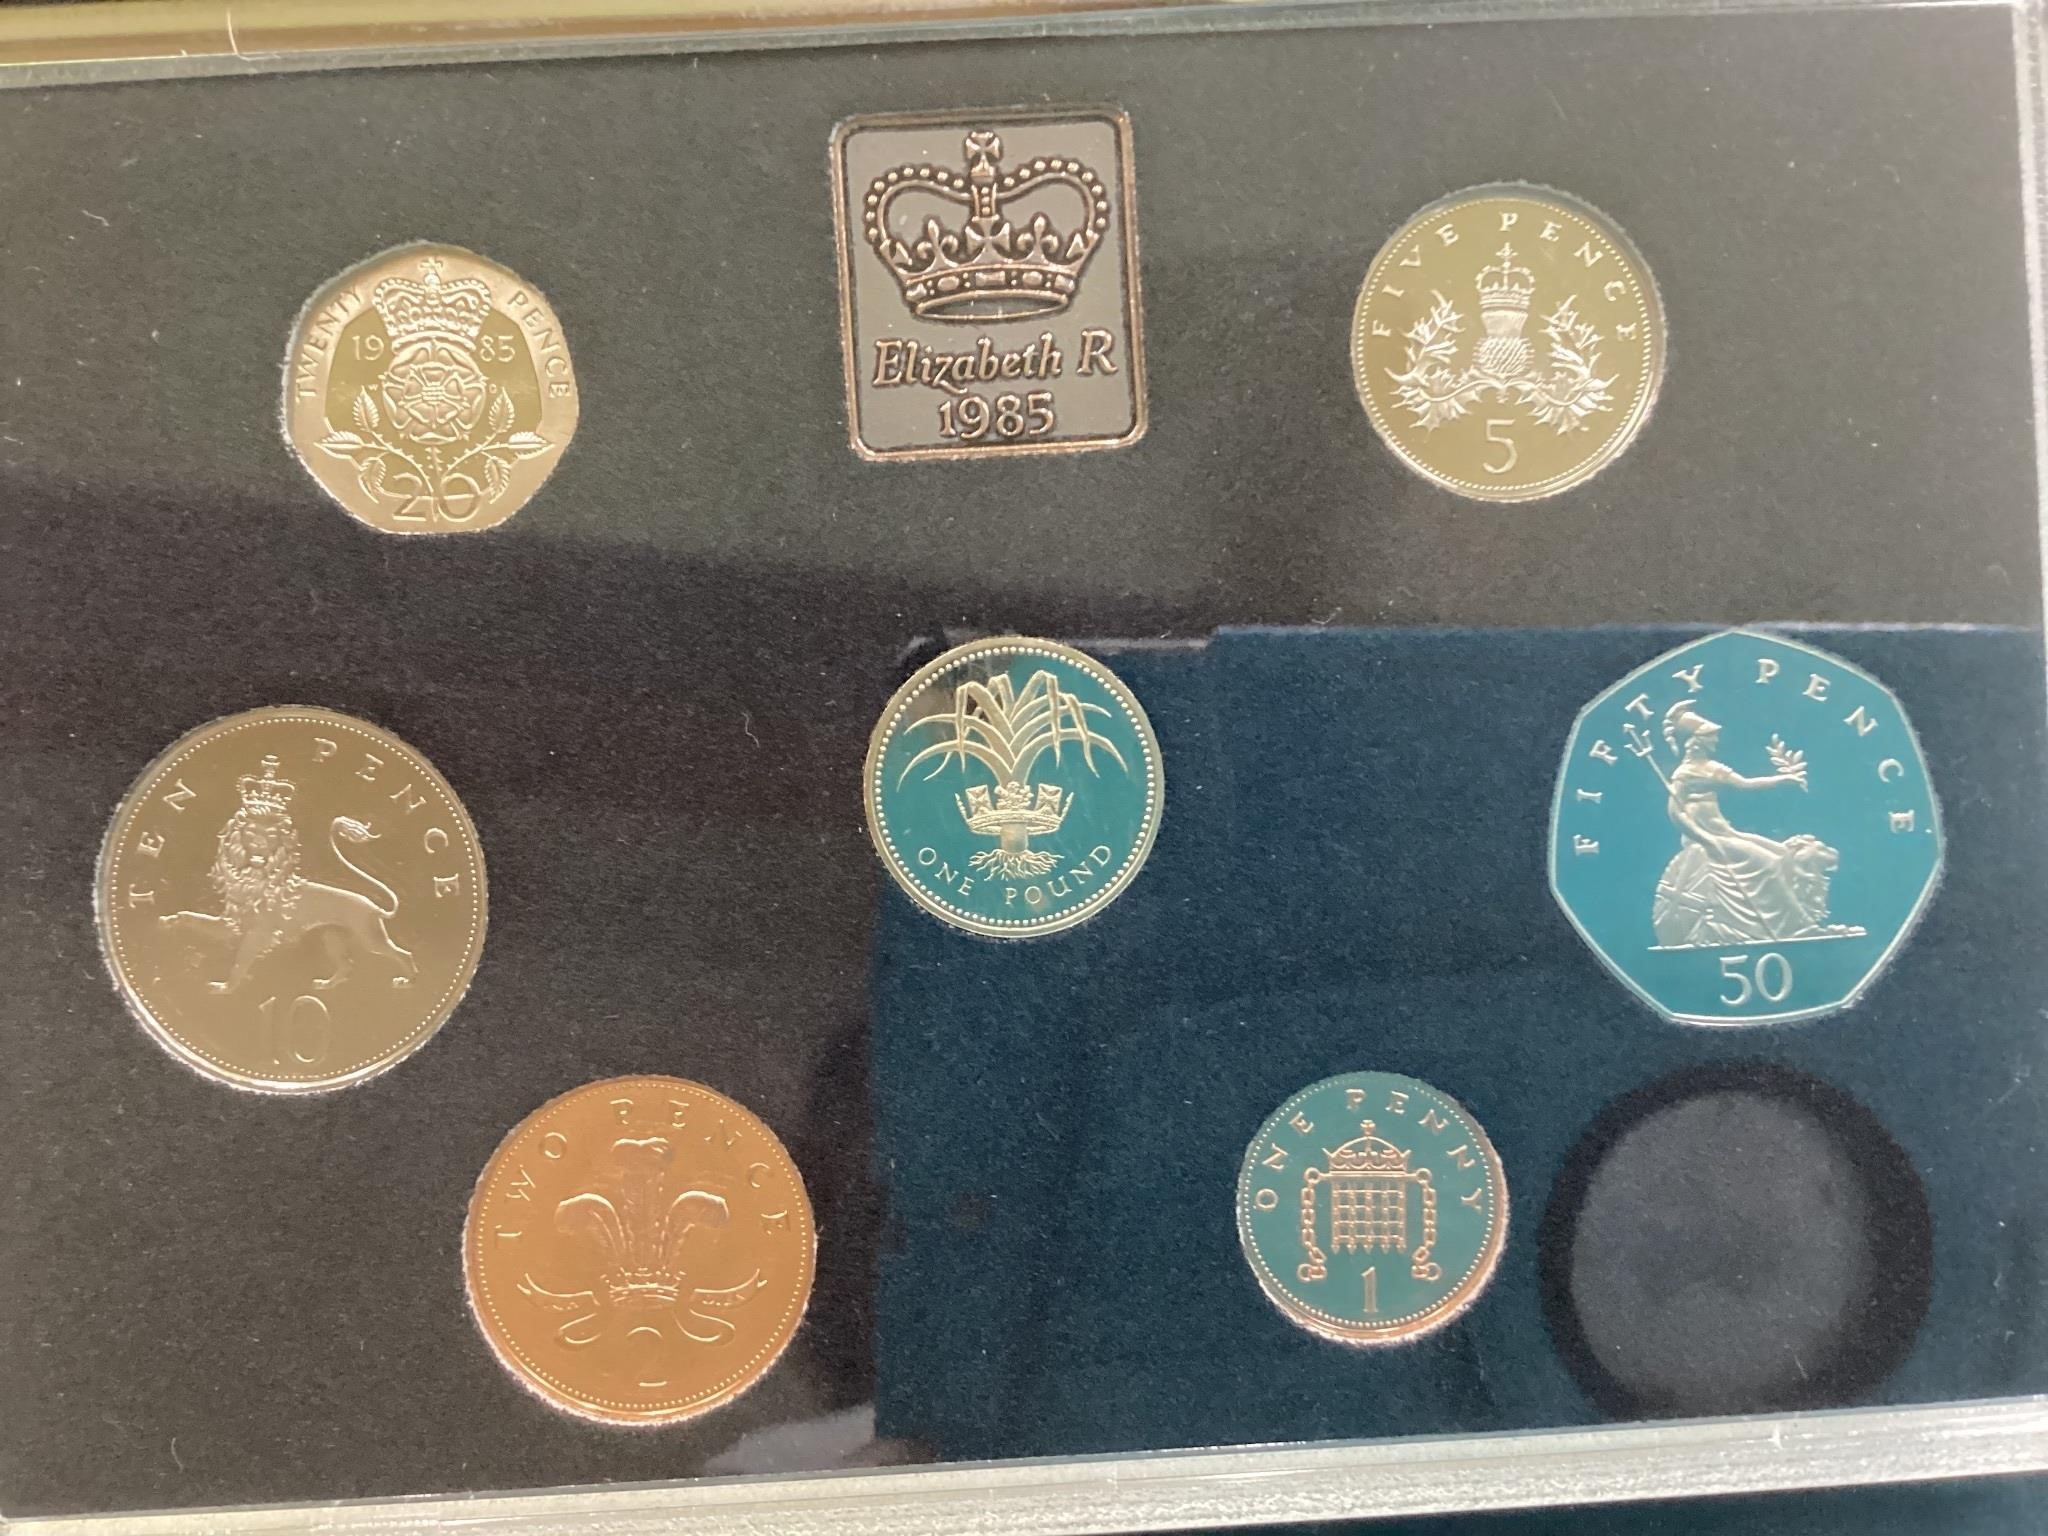 7 COINS. UK PROOF COIN COLLECTION 1985 ROYAL MINT